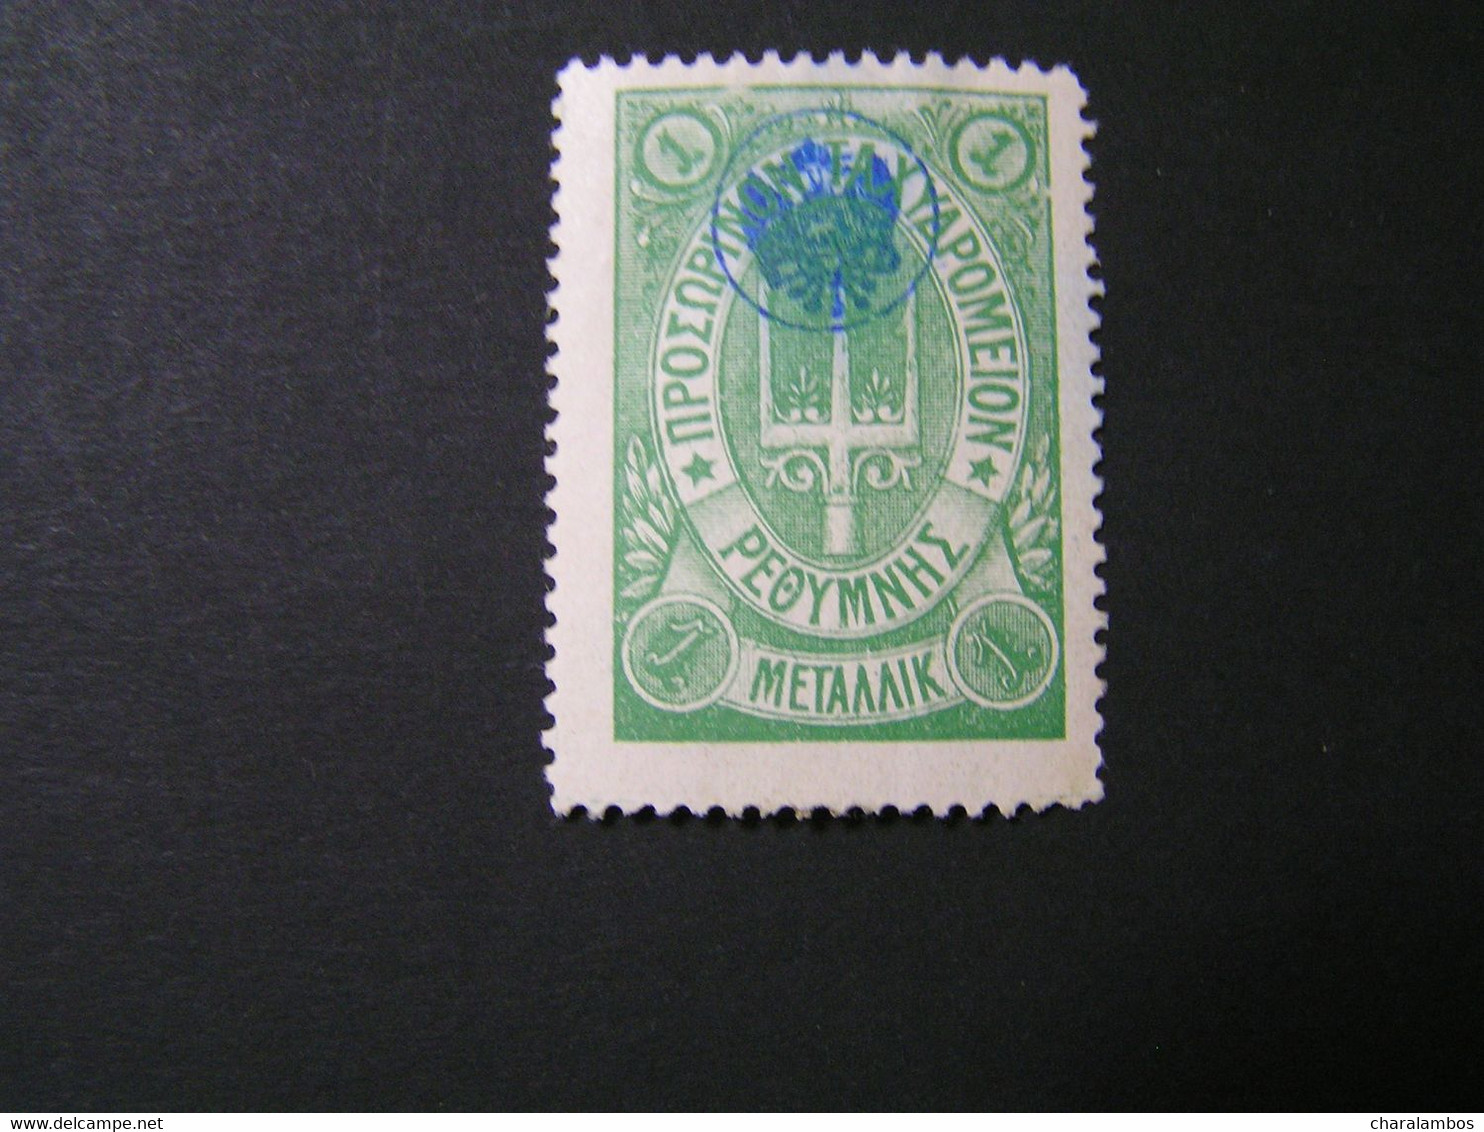 GREECE-CRETE RUSSIAN ADMINISTRATION ISSUES Second Lithographic Issue 1met Green Mlh.. - Crète